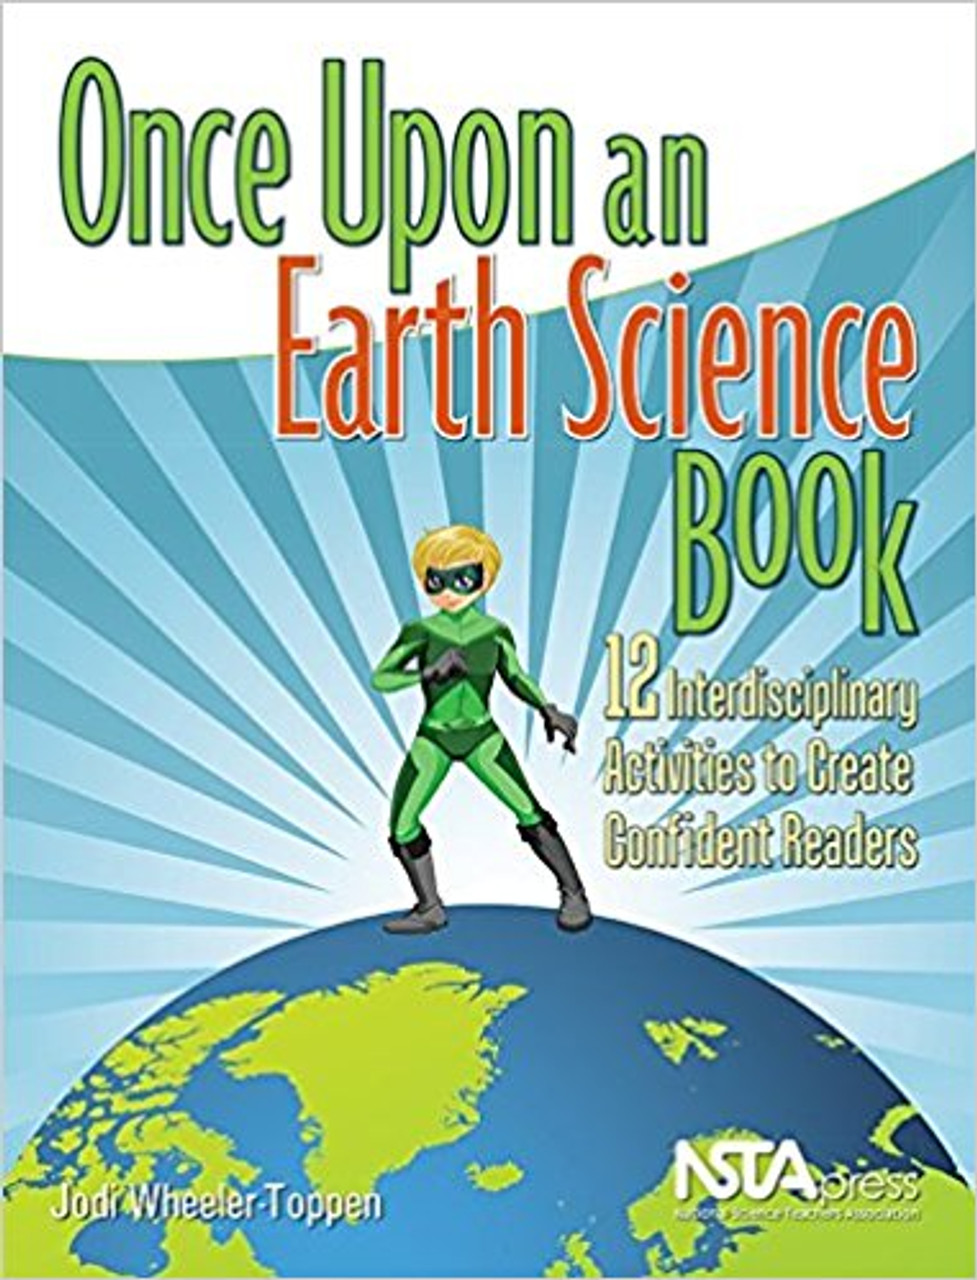 Once Upon and Earth Science Book: 12 Interdisciplinary Activities to Create Confident Readers by Jodi Wheeler-Toppen